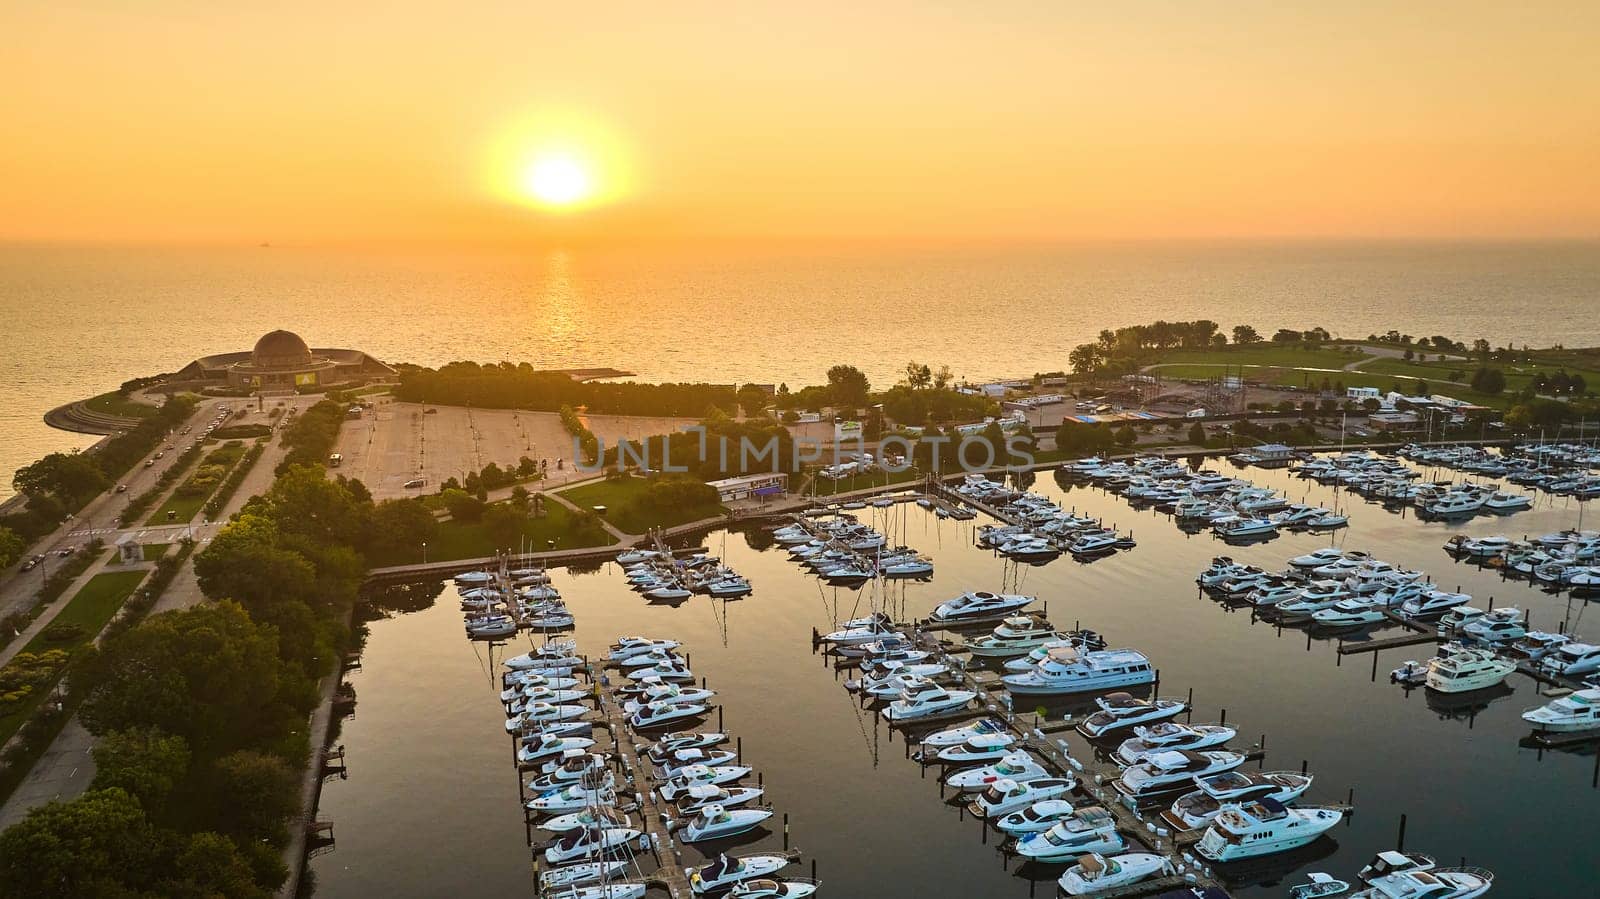 Image of Boats on piers in Burnham Harbor with golden sun rising aerial Lake Michigan, Chicago, IL